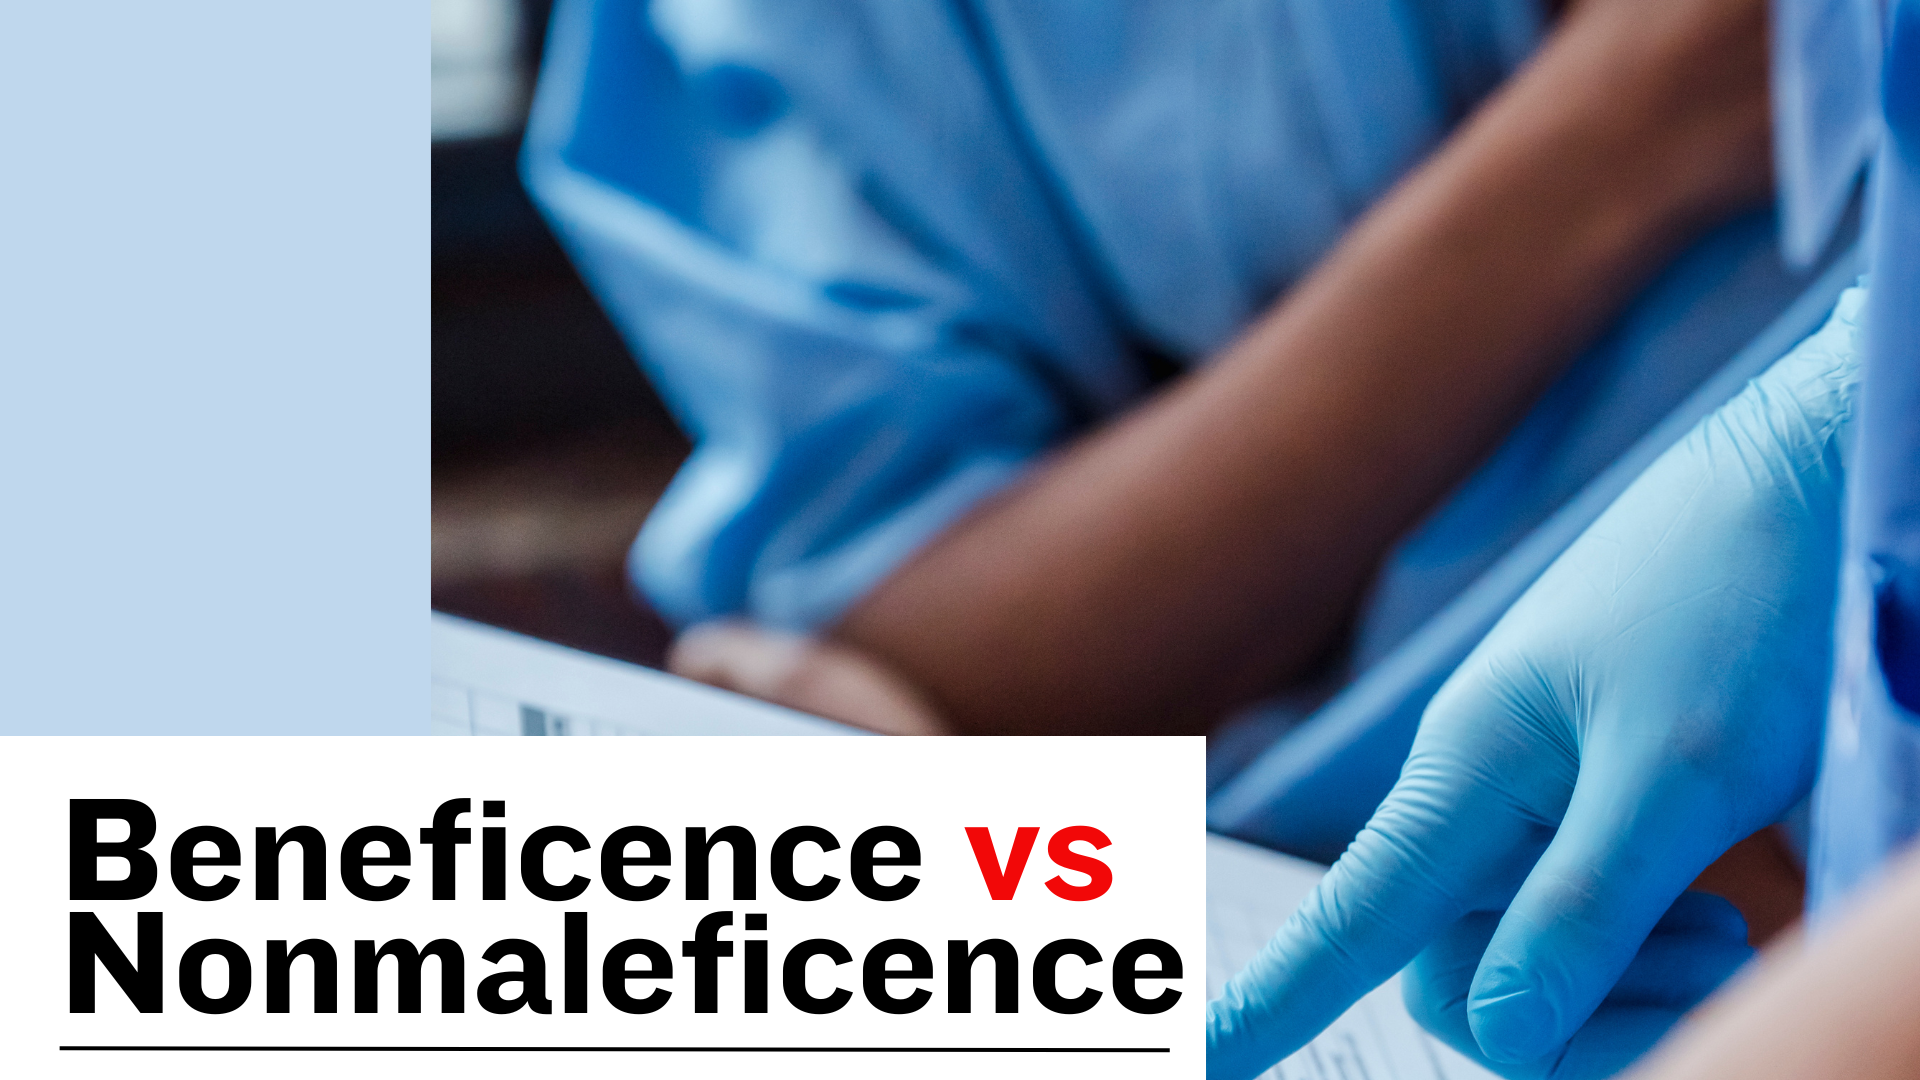 Main Difference Between Beneficence and Nonmaleficence